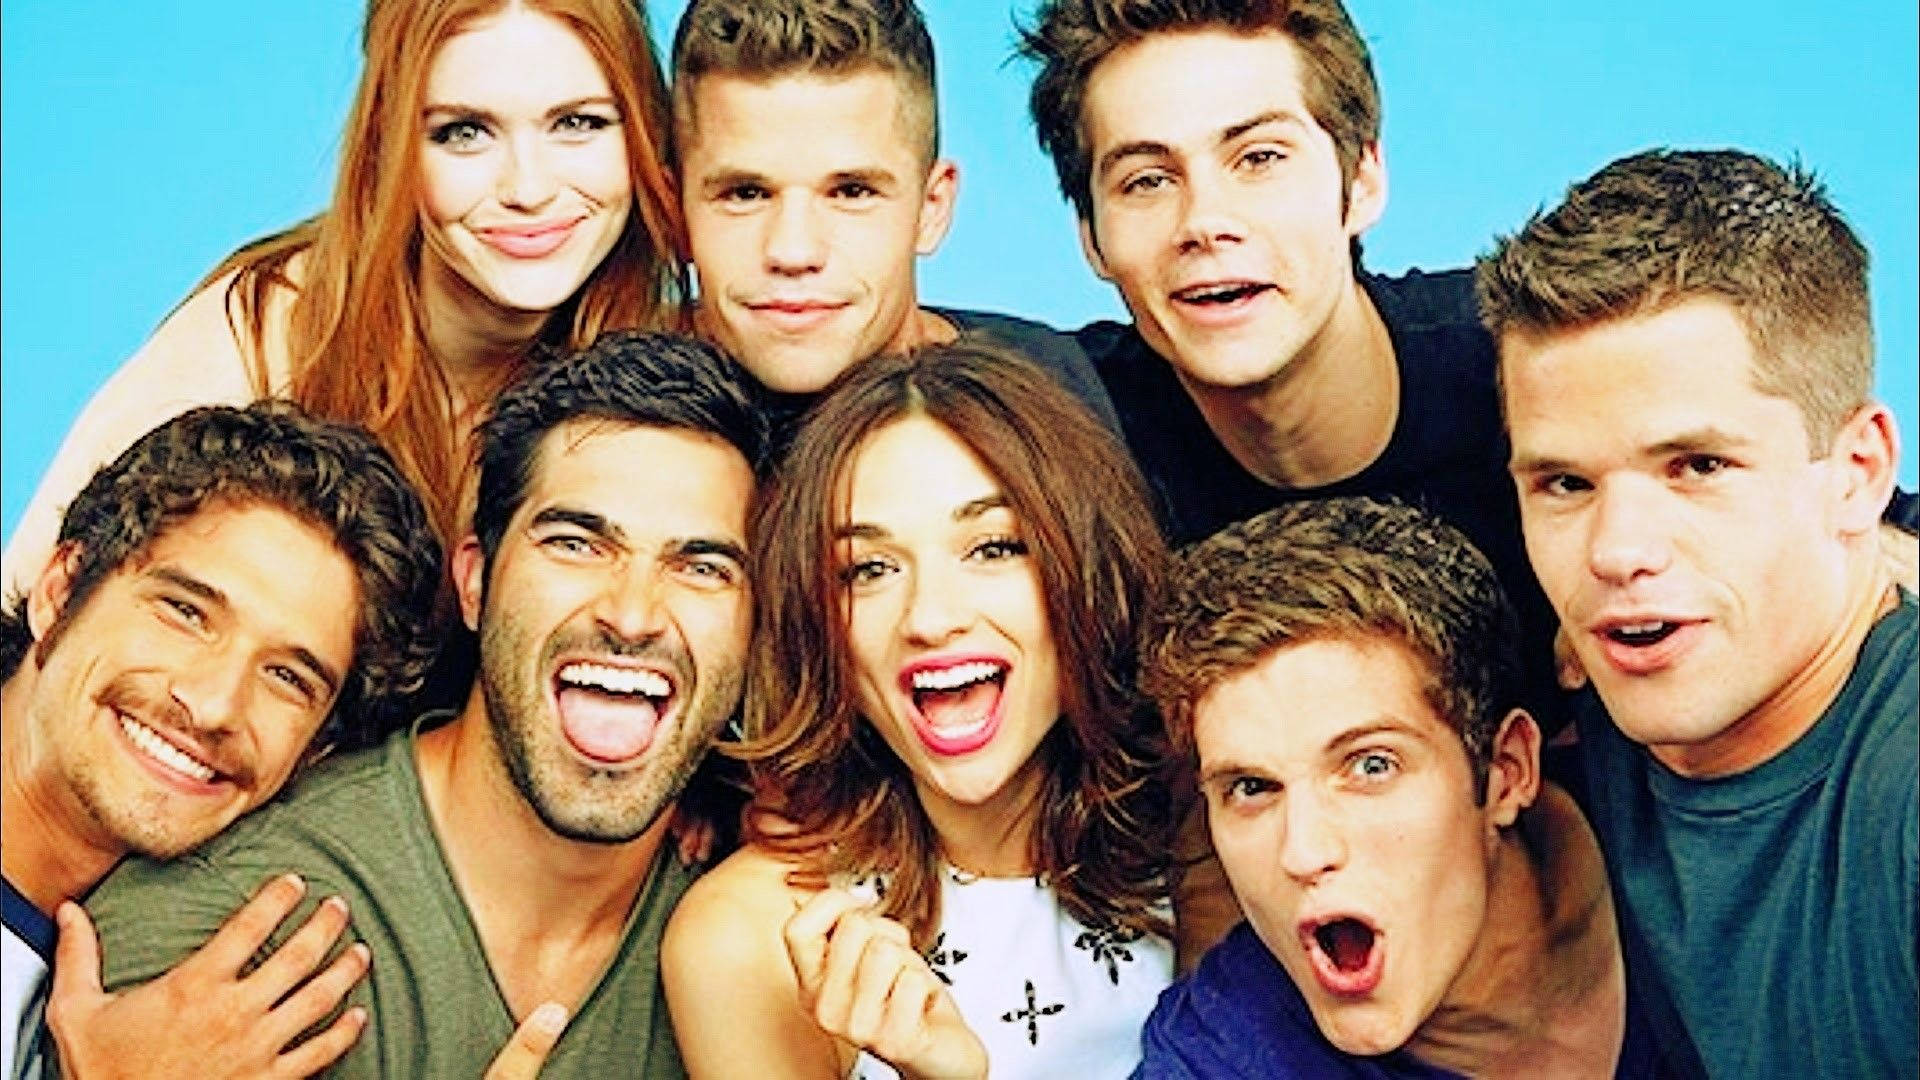 Cast Of Teen Wolf During Reunion Photoshoot Background